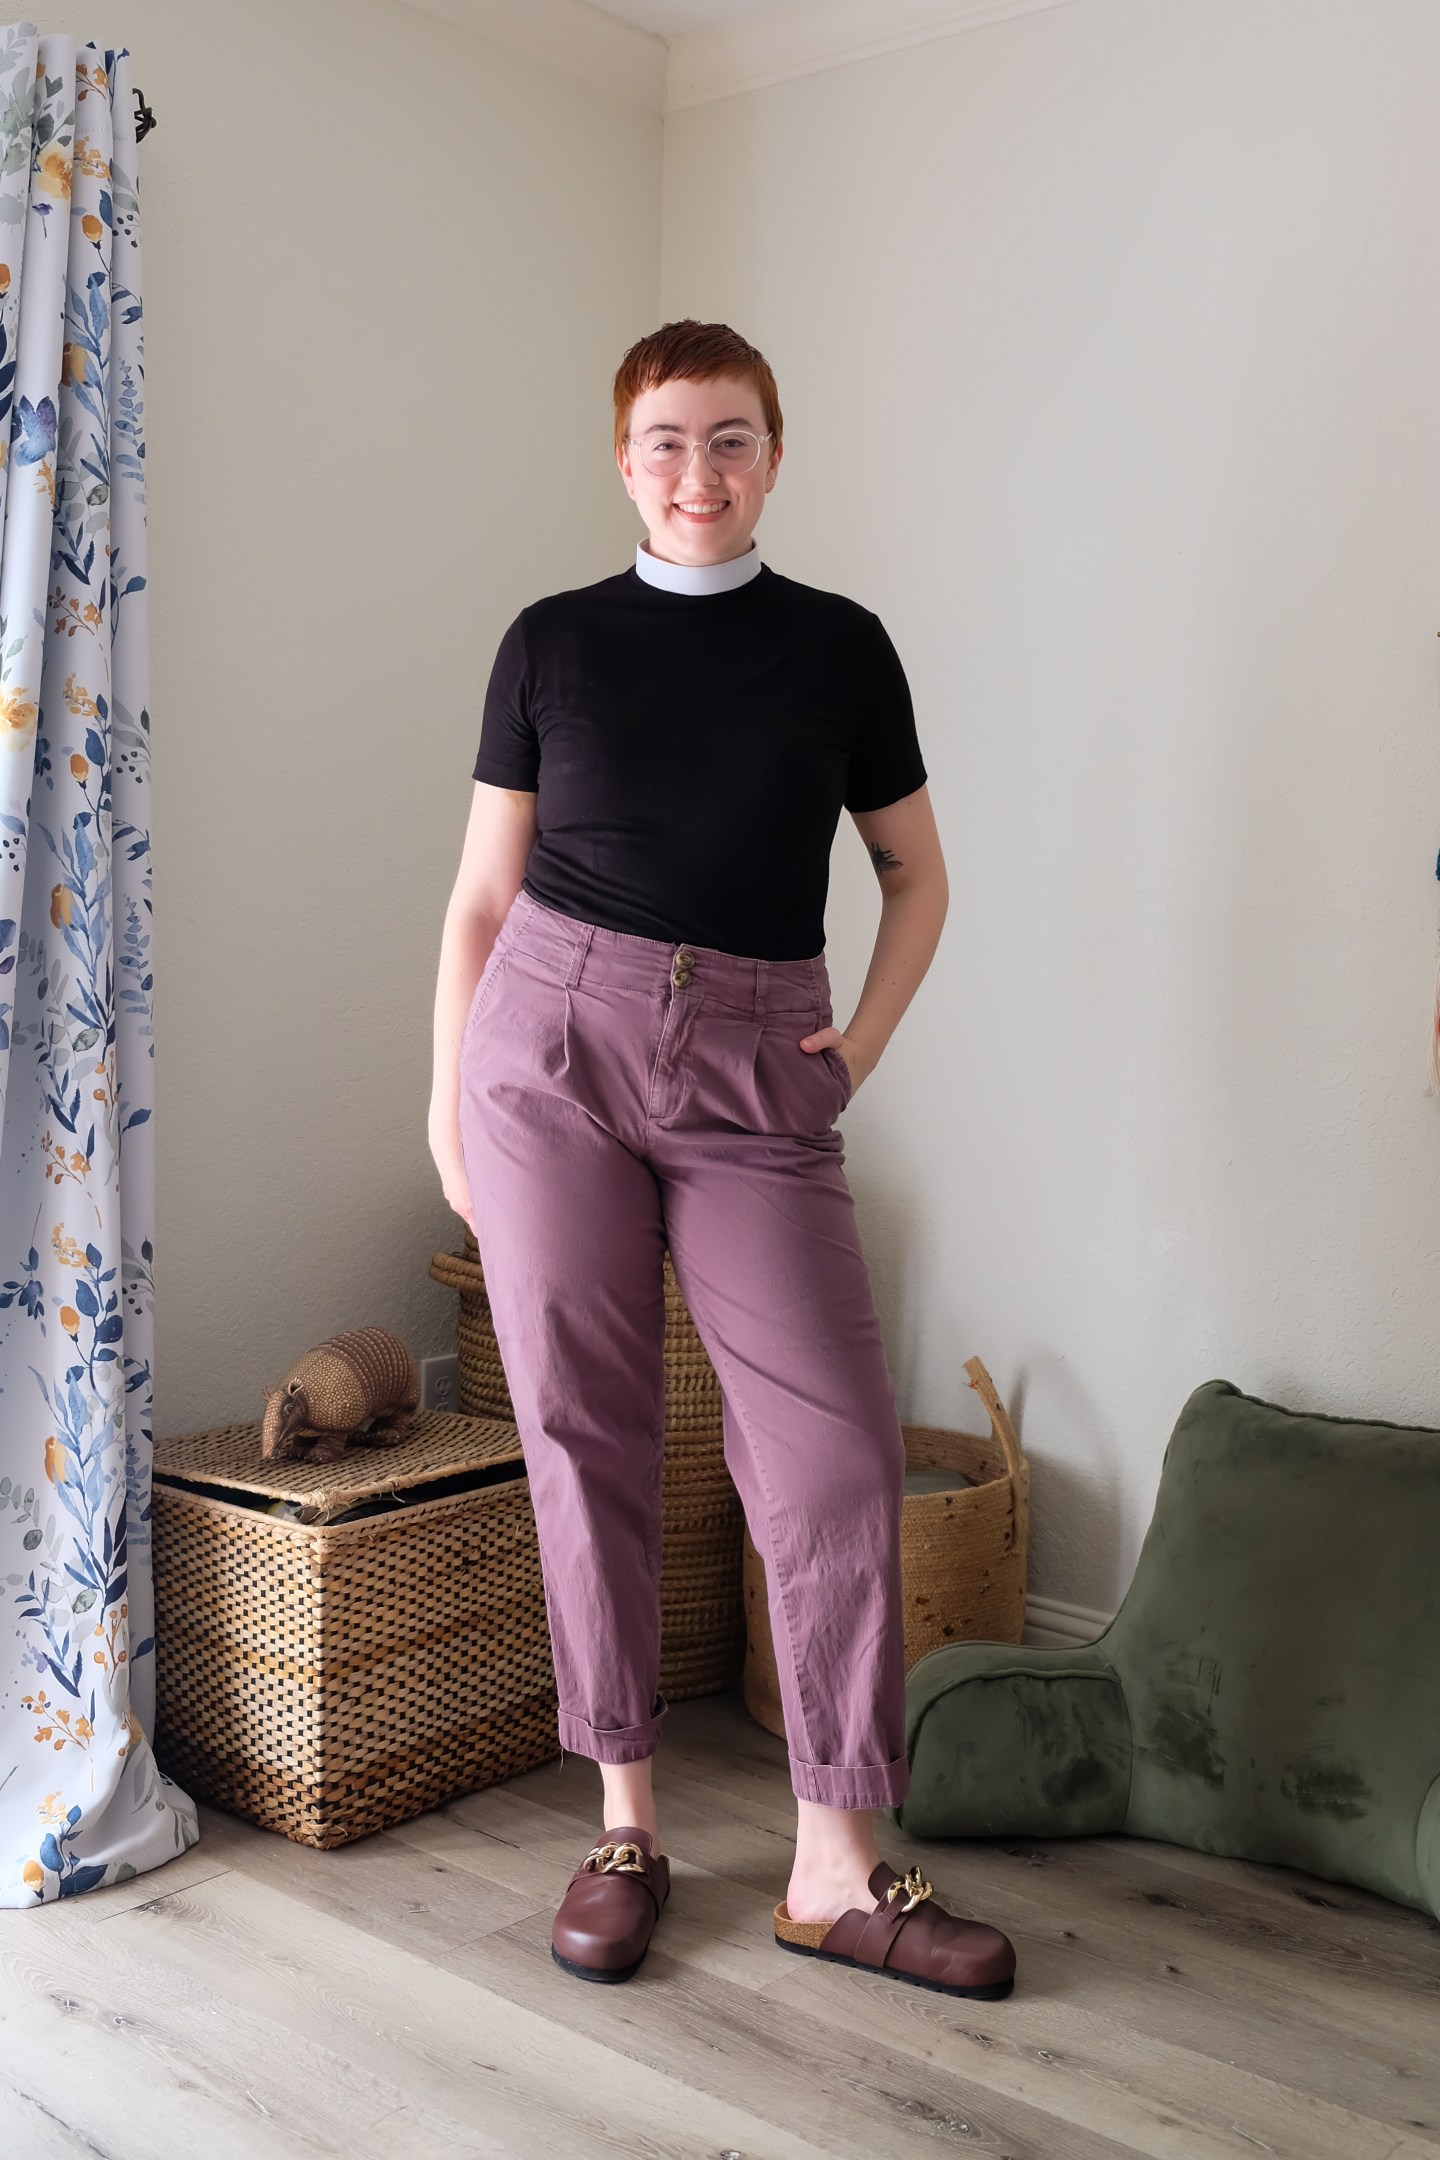 Leah stands in bedroom wearing a black clergy shirt with white collar, purple pants, and burgundy clogs - Alohas Sustainable Clogs Review